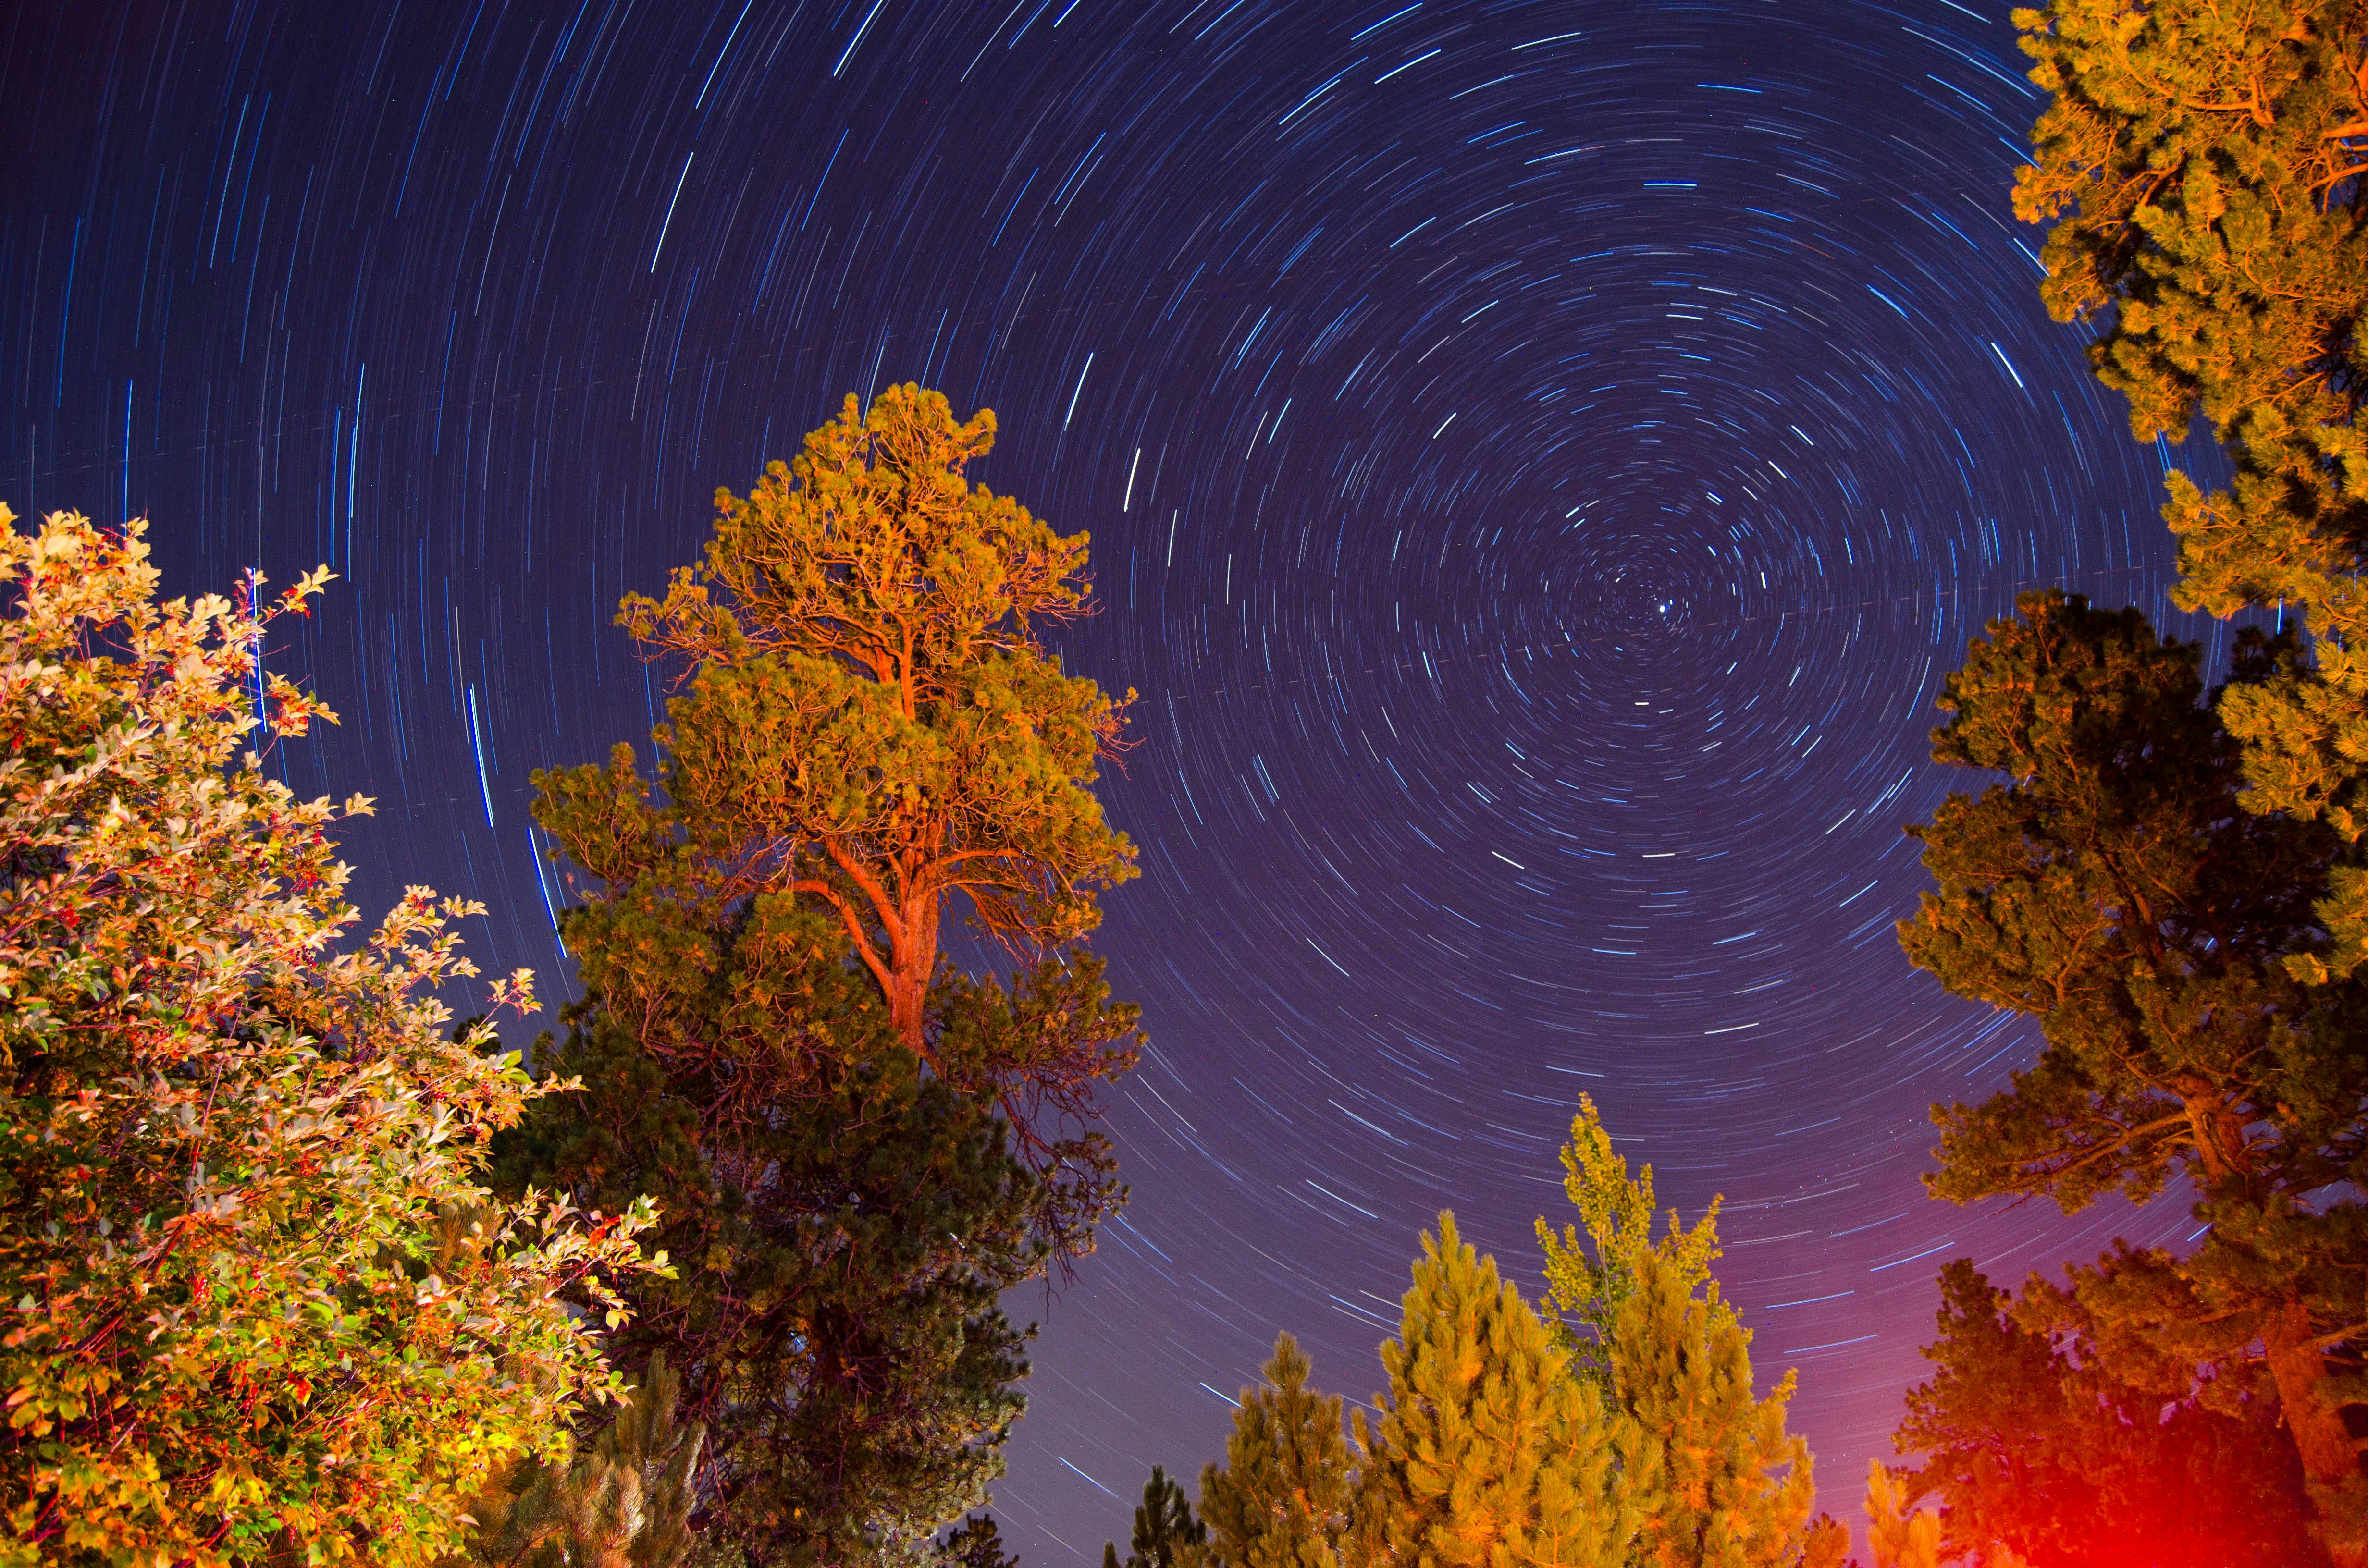 time lapse photography of night stars